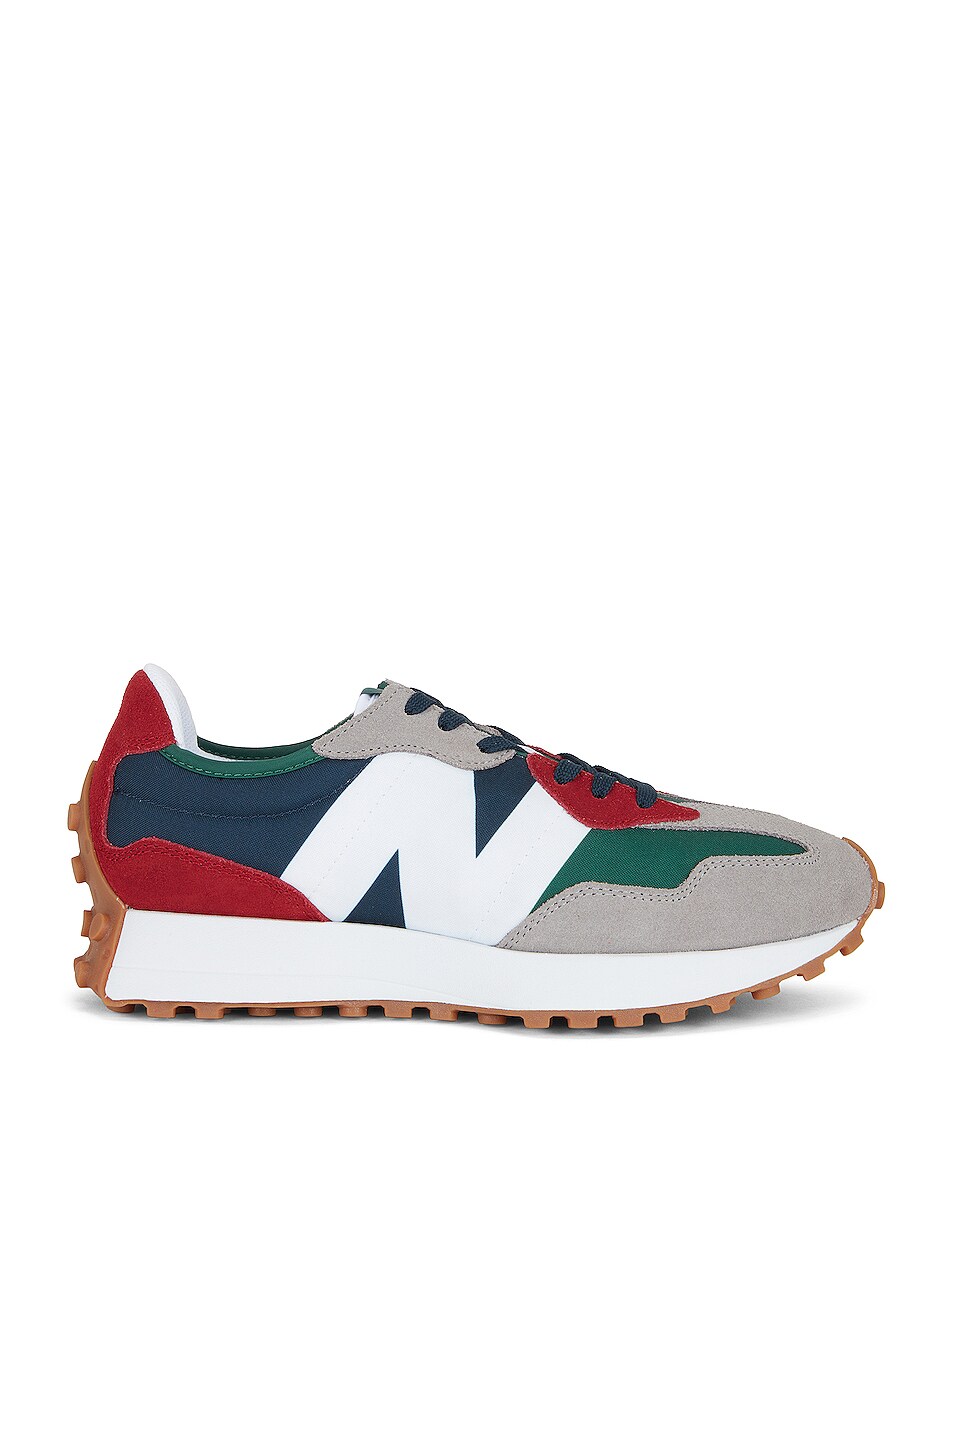 Image 1 of New Balance 327 in Navy, Green & Team Red